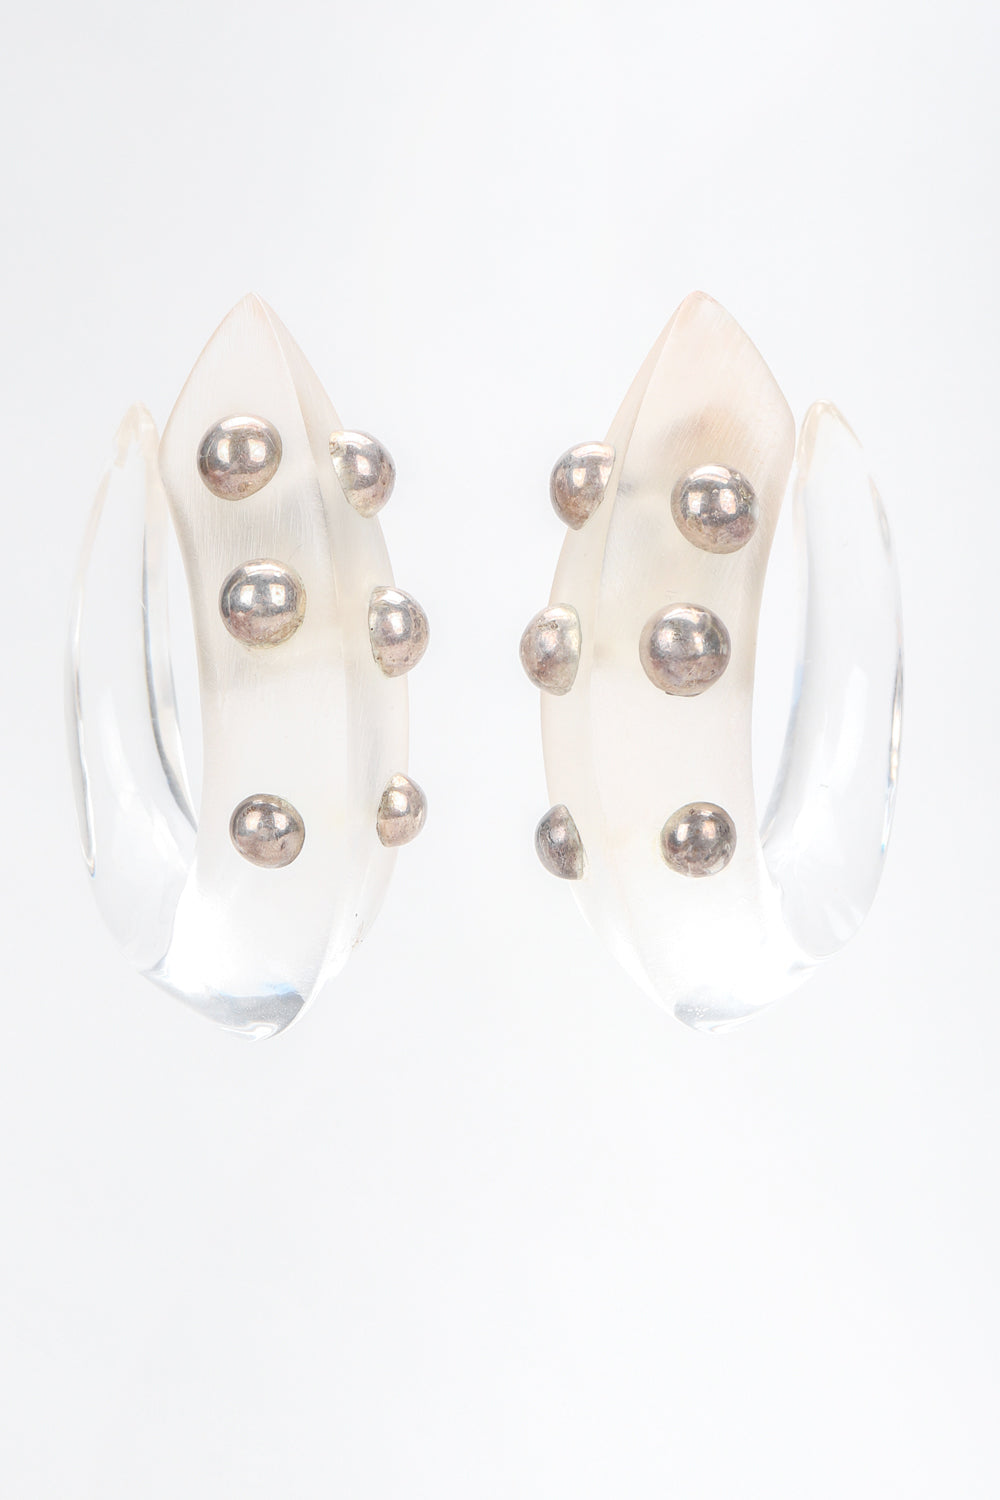 Recess Designer Consignment Vintage Patricia Von Muslin Frosted Lucite Studded Hoop Hook Earrings Los Angeles Resale